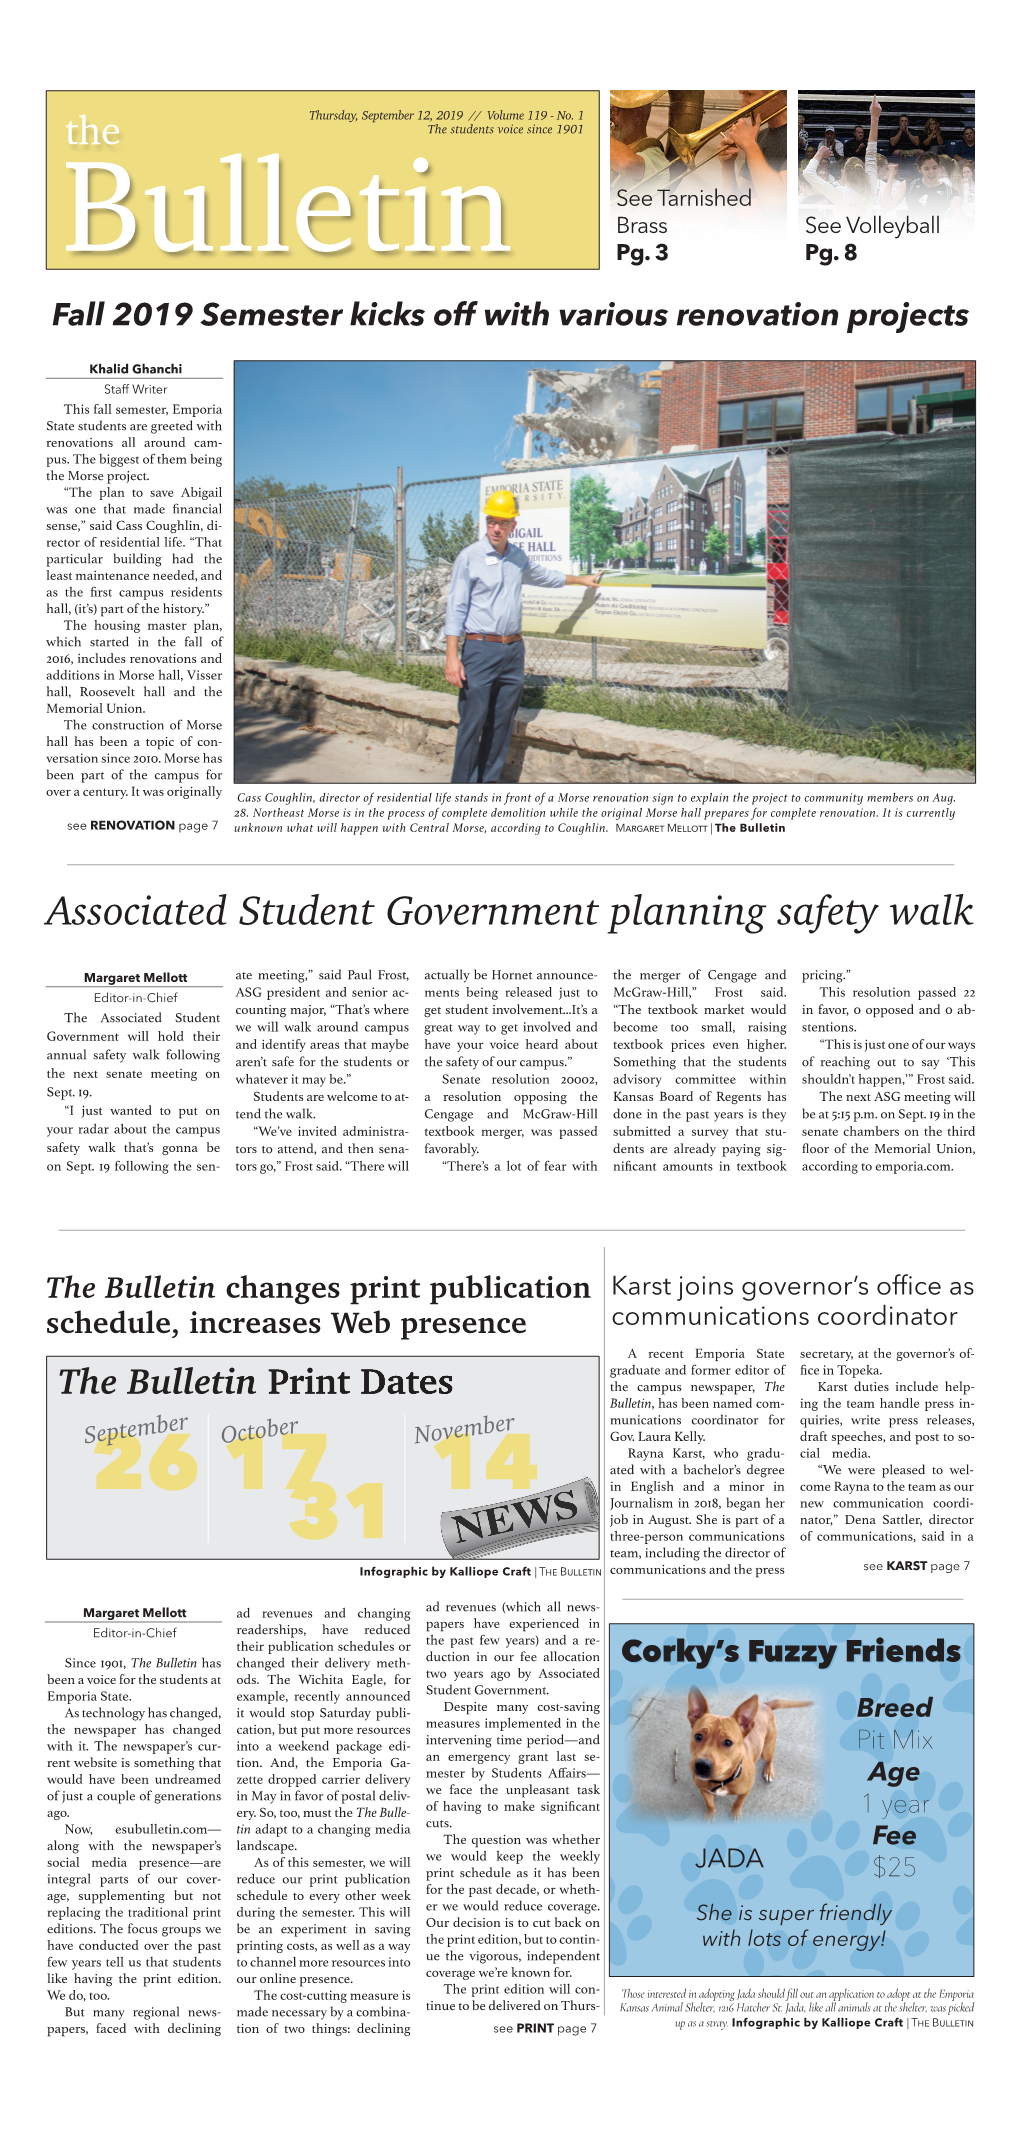 Associated Student Government Planning Safety Walk